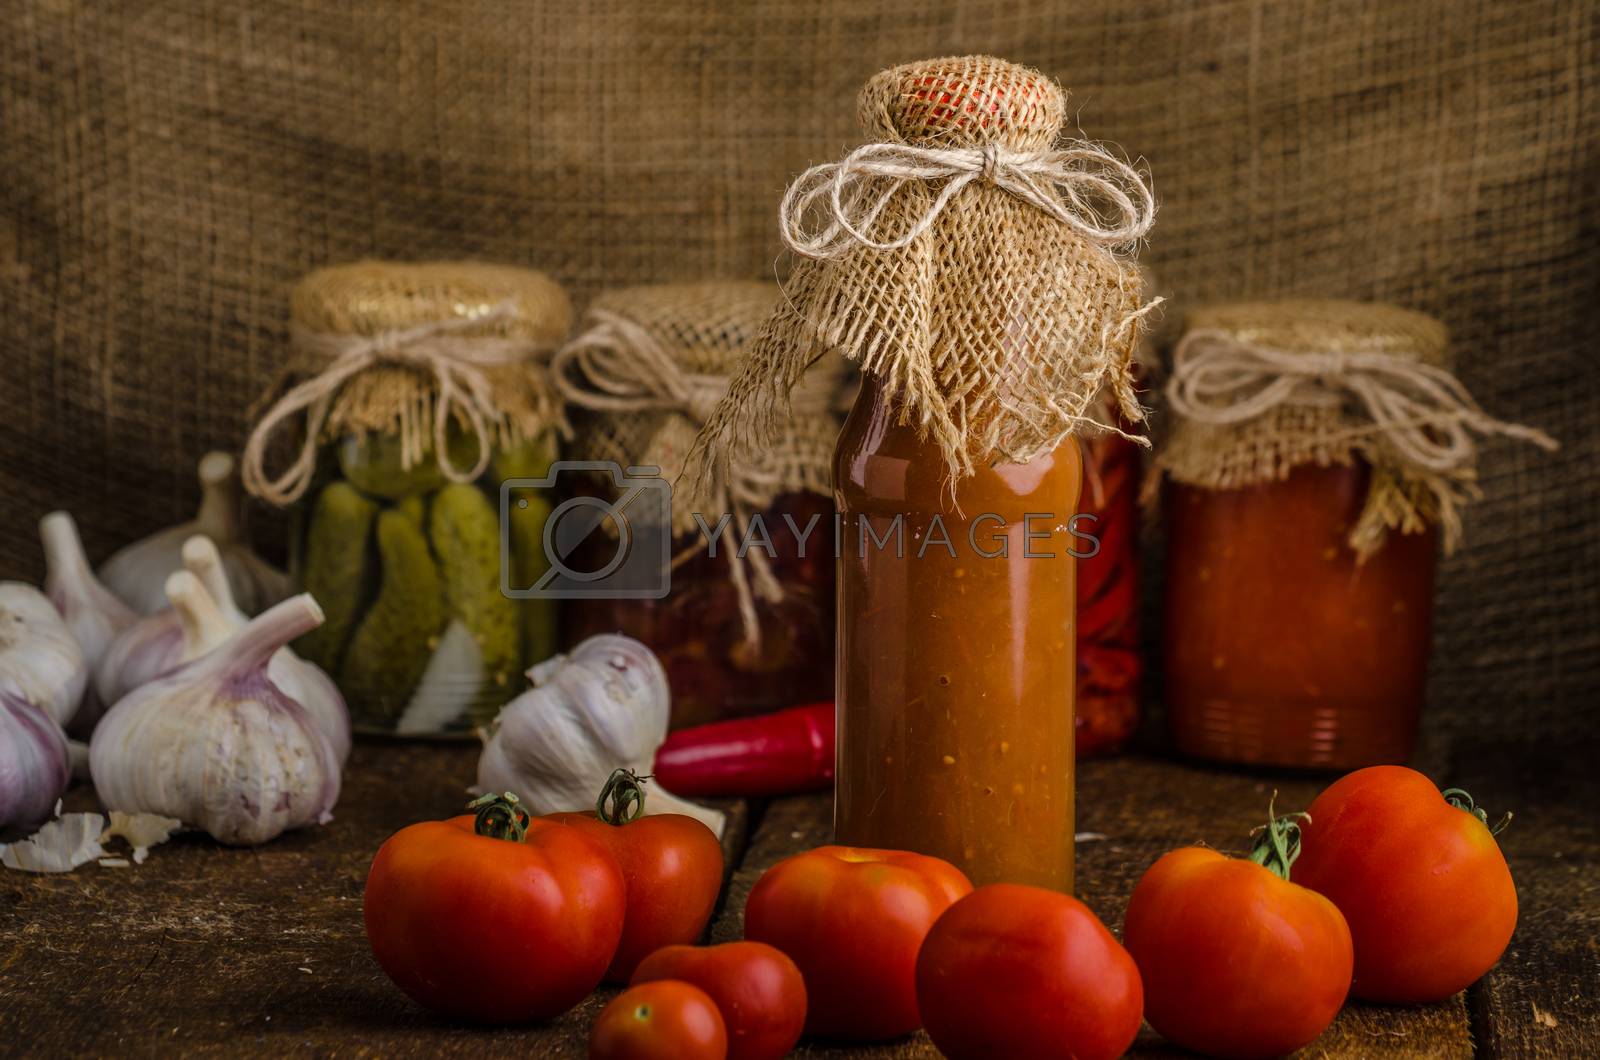 Royalty free image of Homemade ketchup by Peteer